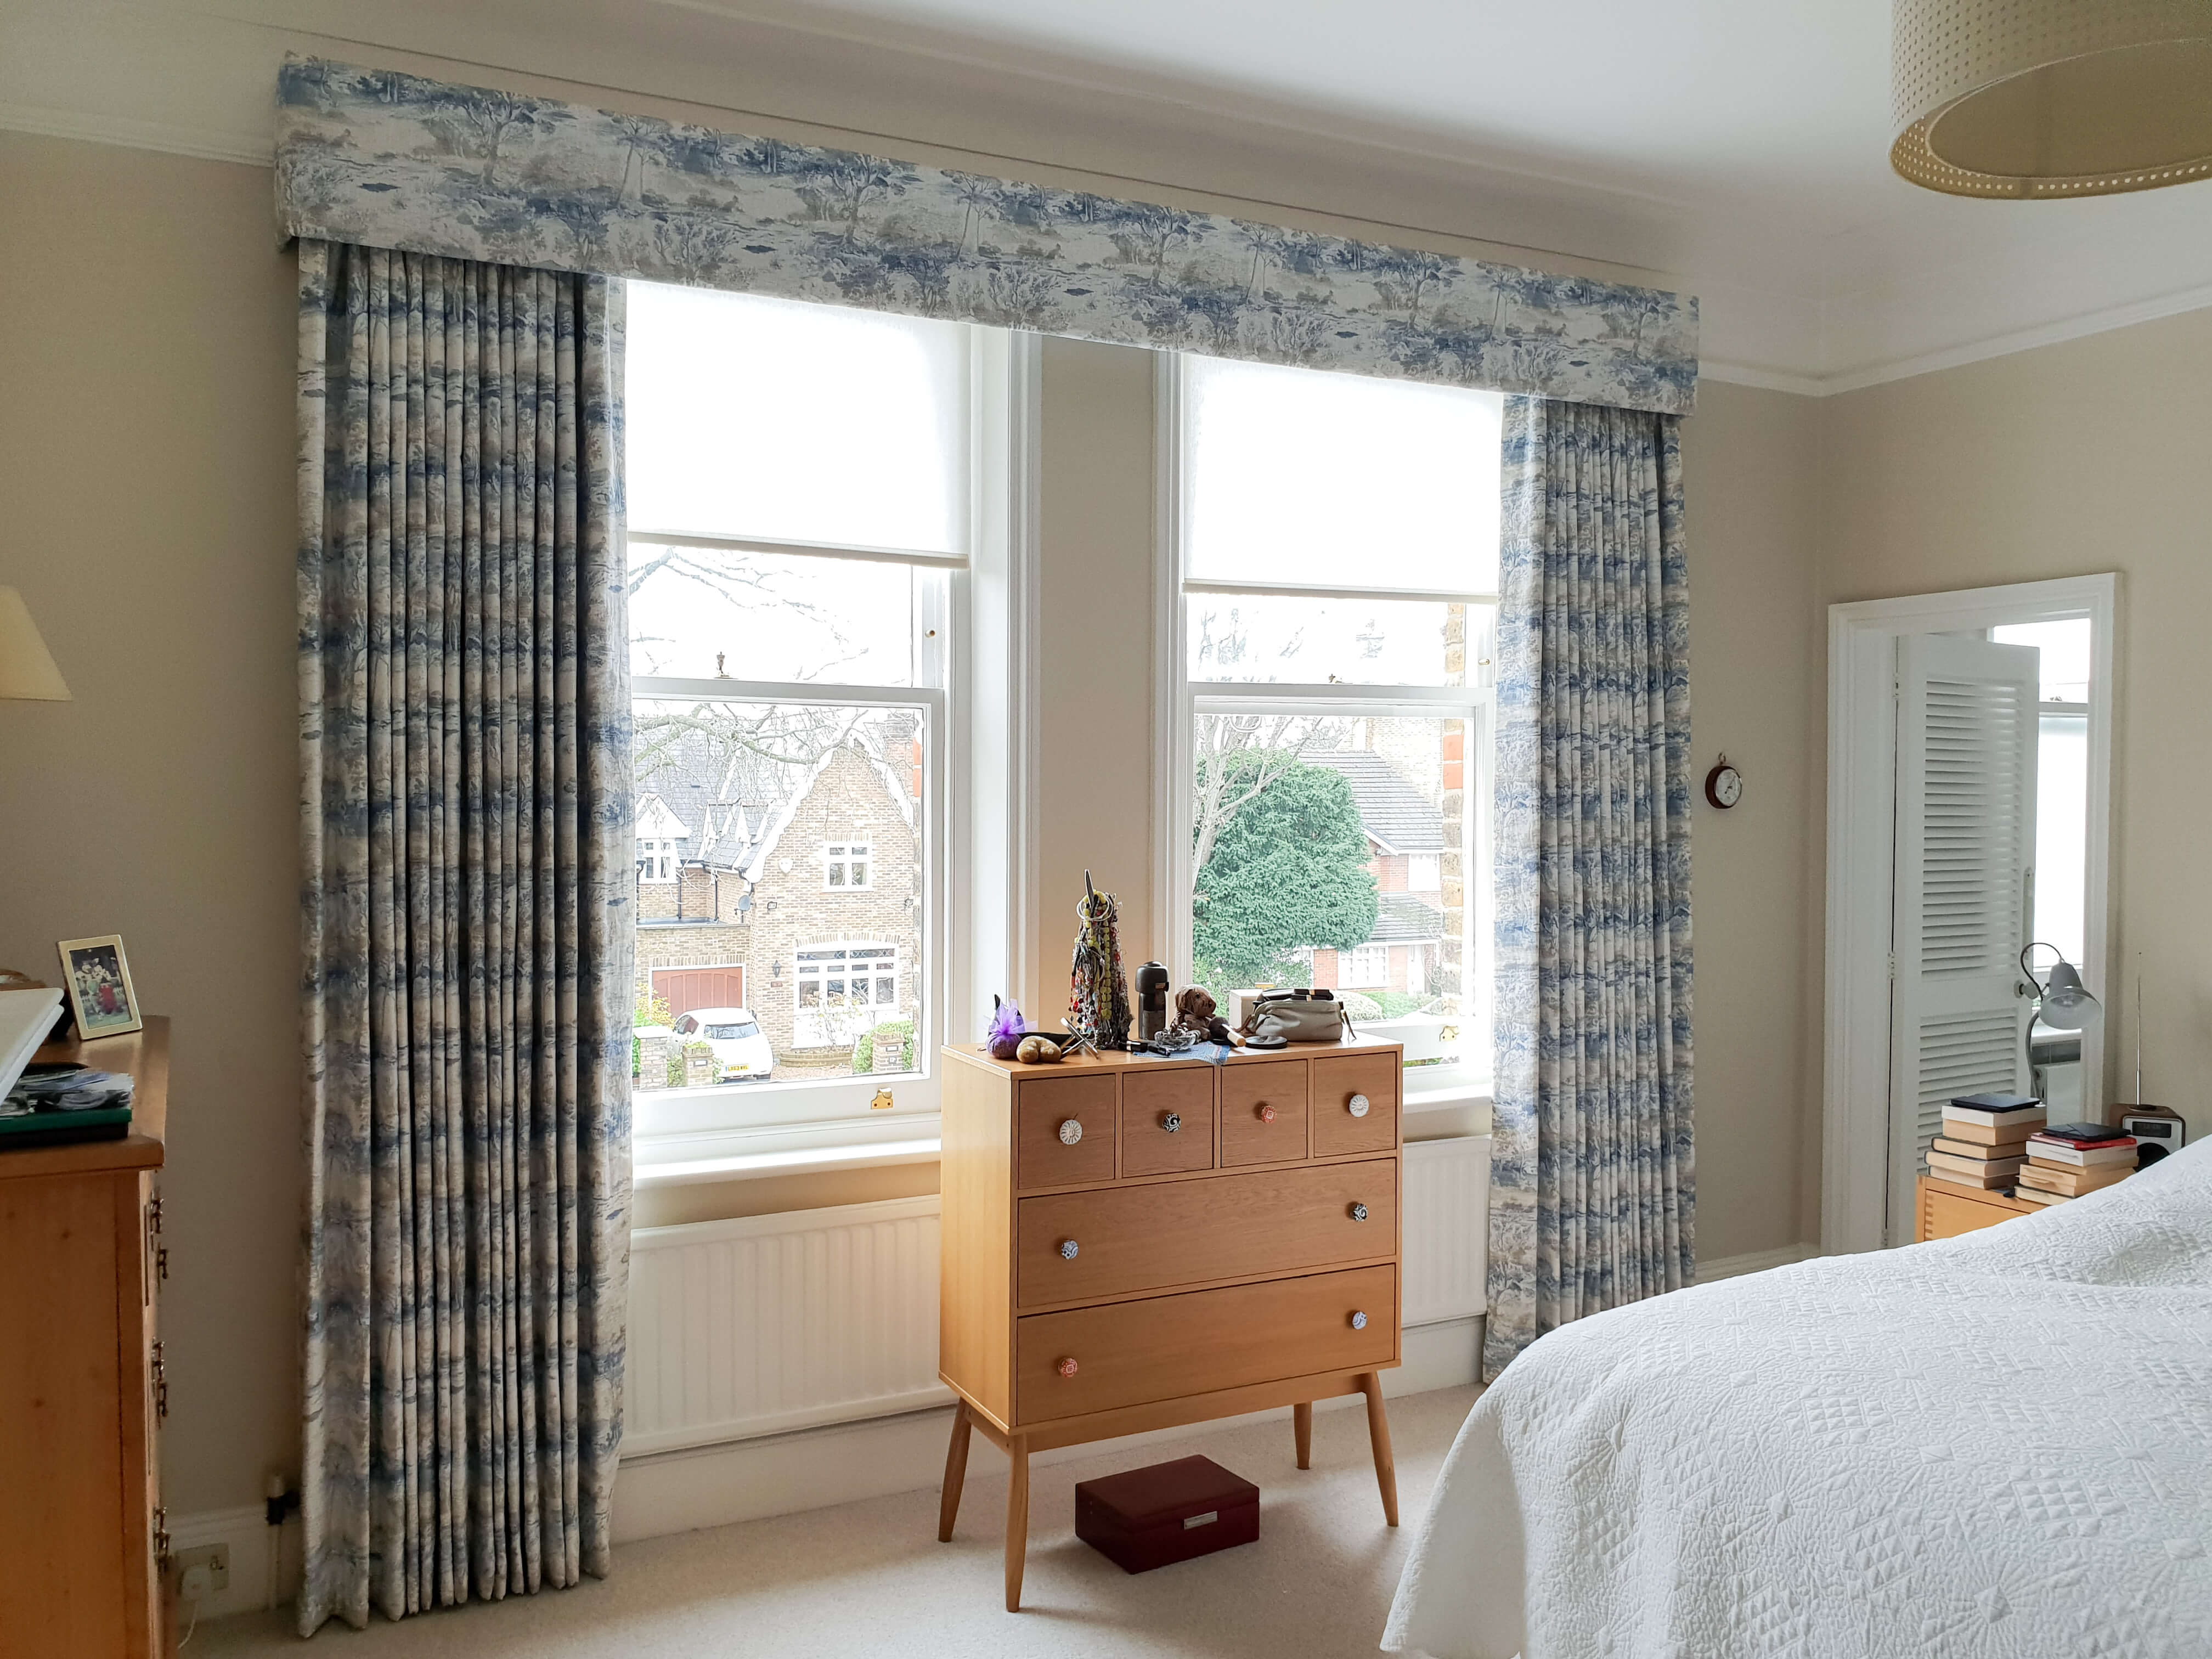 Patterened bedroom curtains with box pelmet